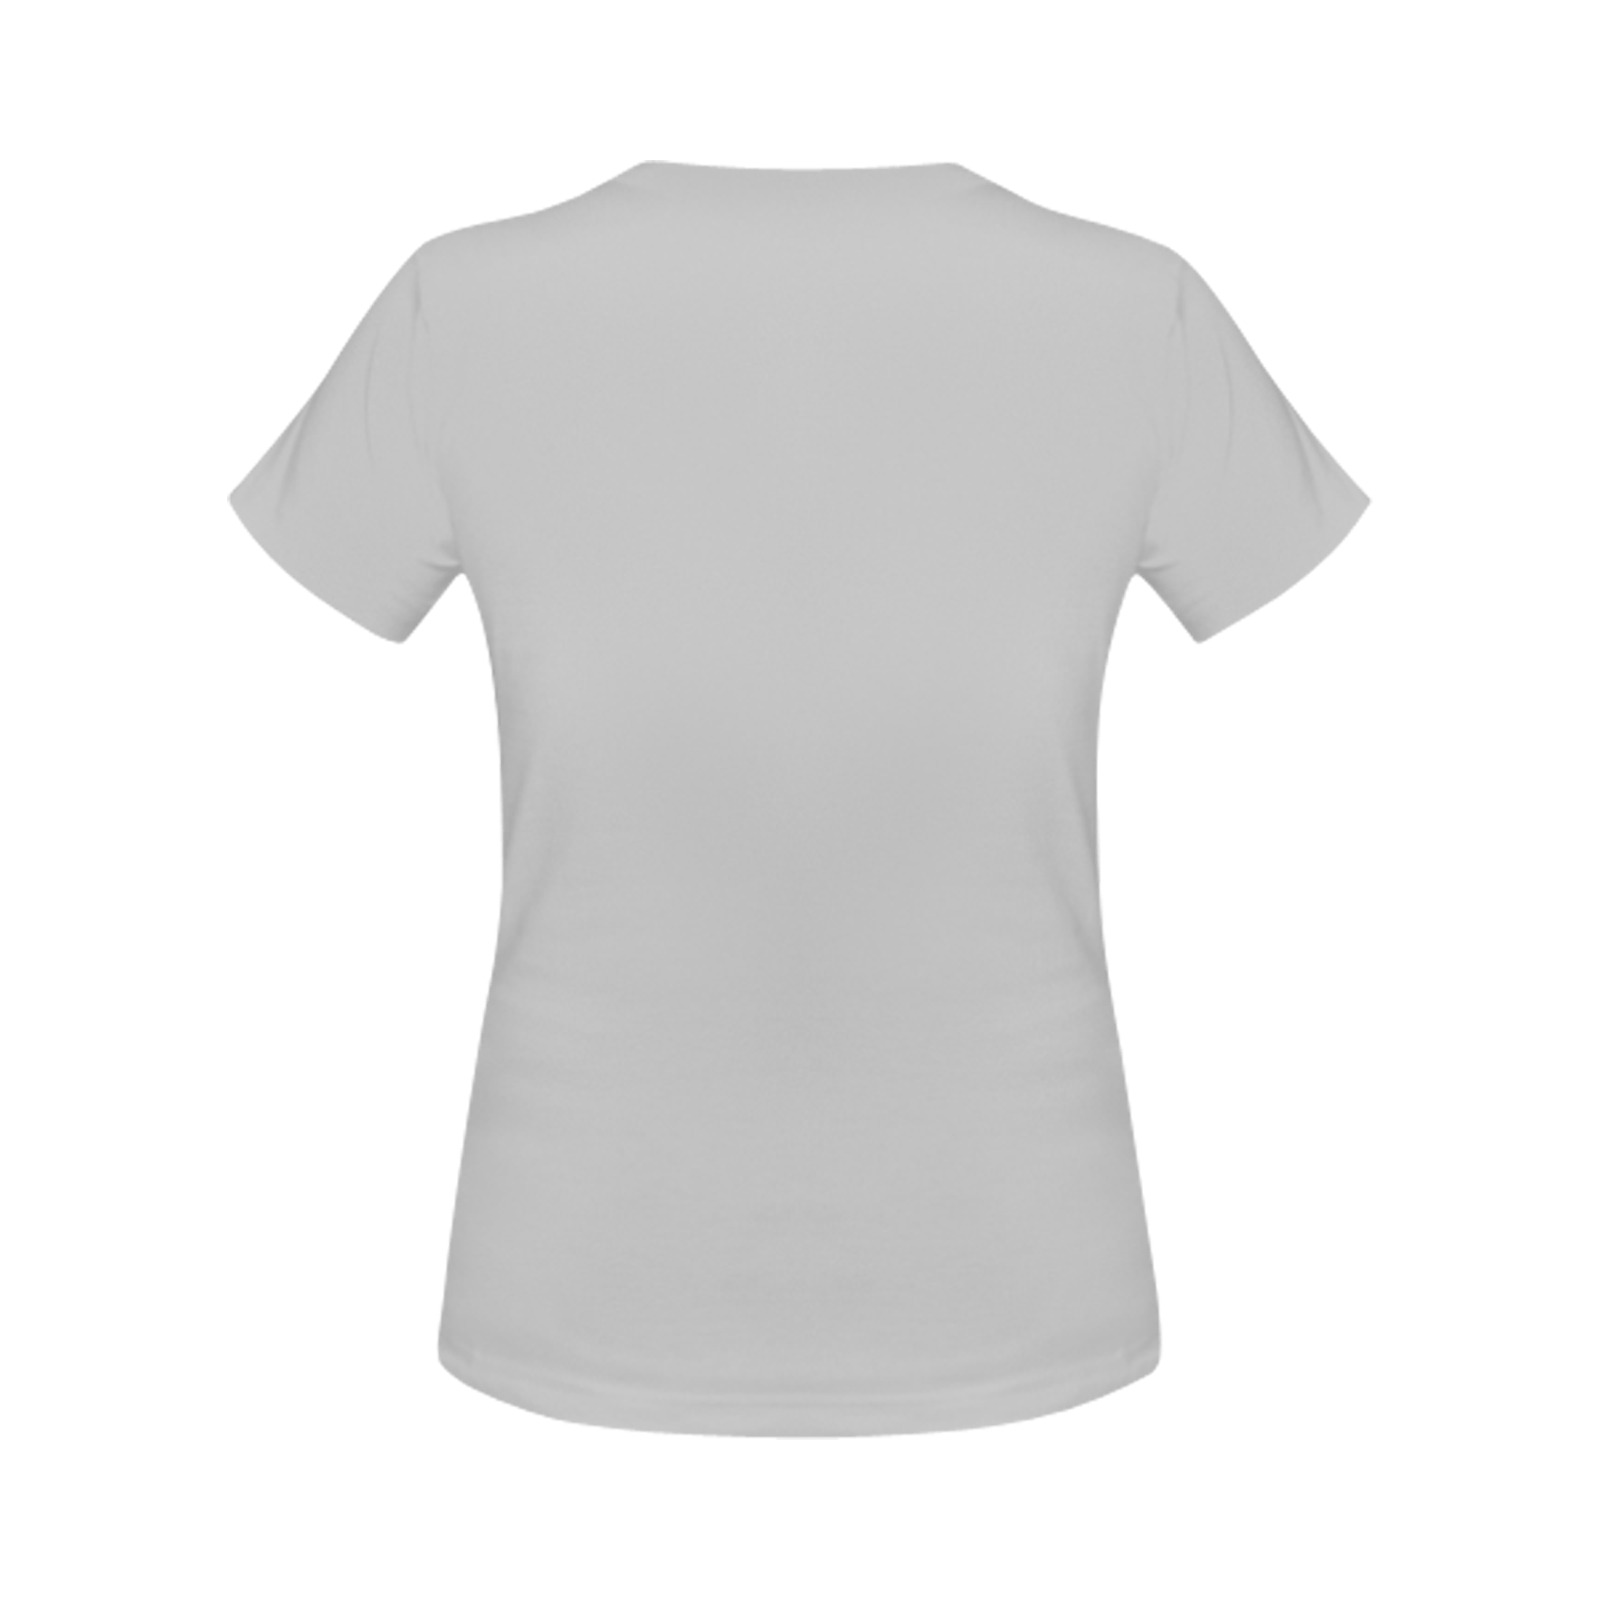 D.D.A.LOGO.GRY. Women's T-Shirt in USA Size (Front Printing Only)